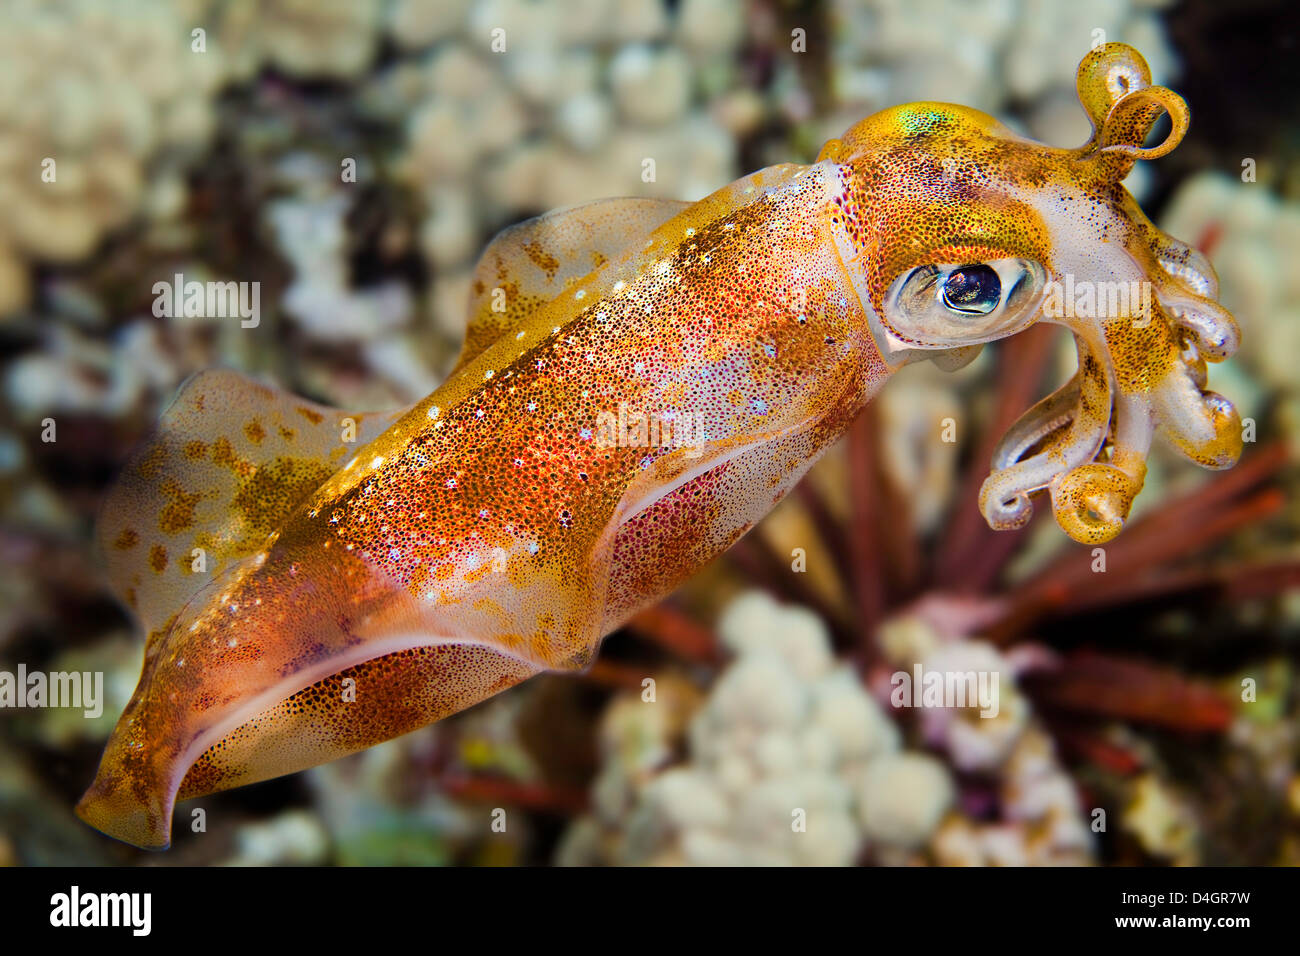 The male oval squid, Sepioteuthis lessoniana, can reach 14 inches in length. Hawaii. Stock Photo